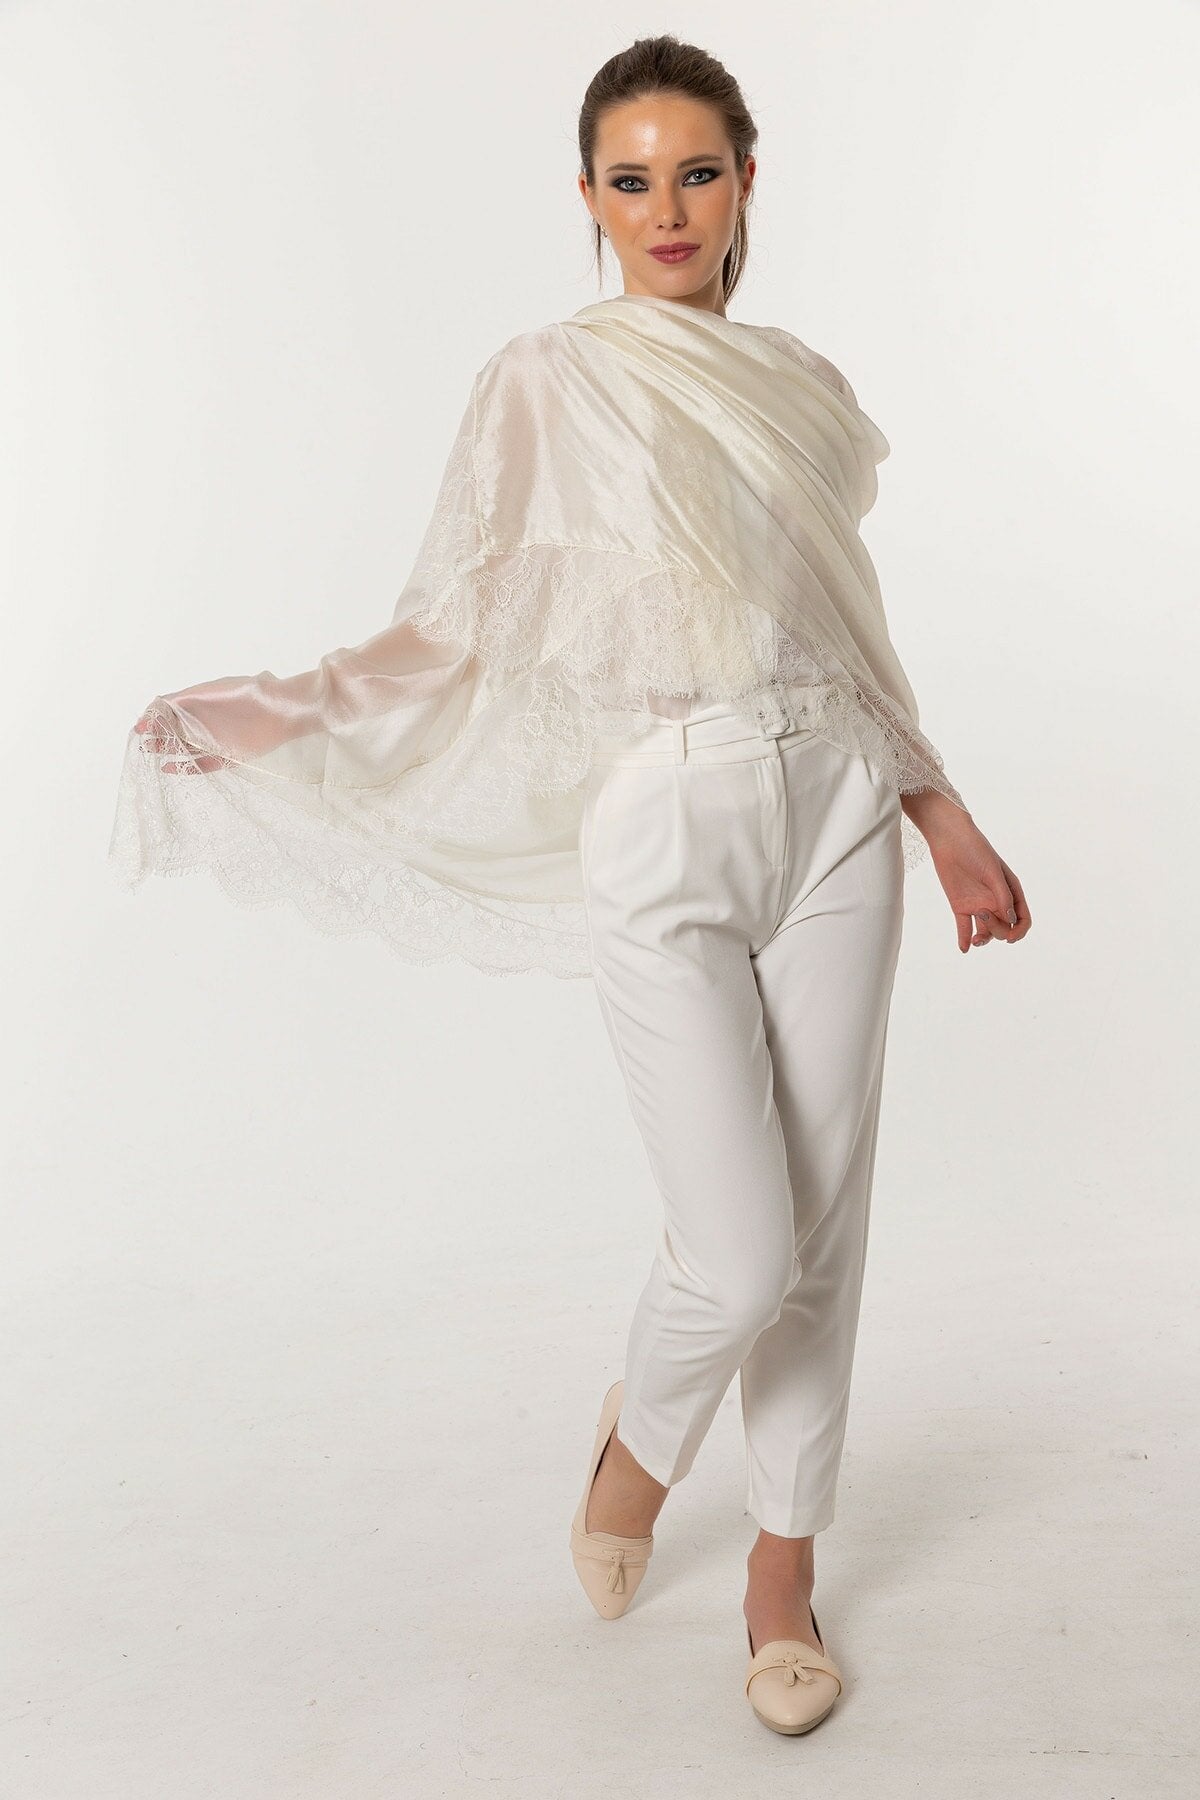 Intimate Silk with Lace Stole Bridal